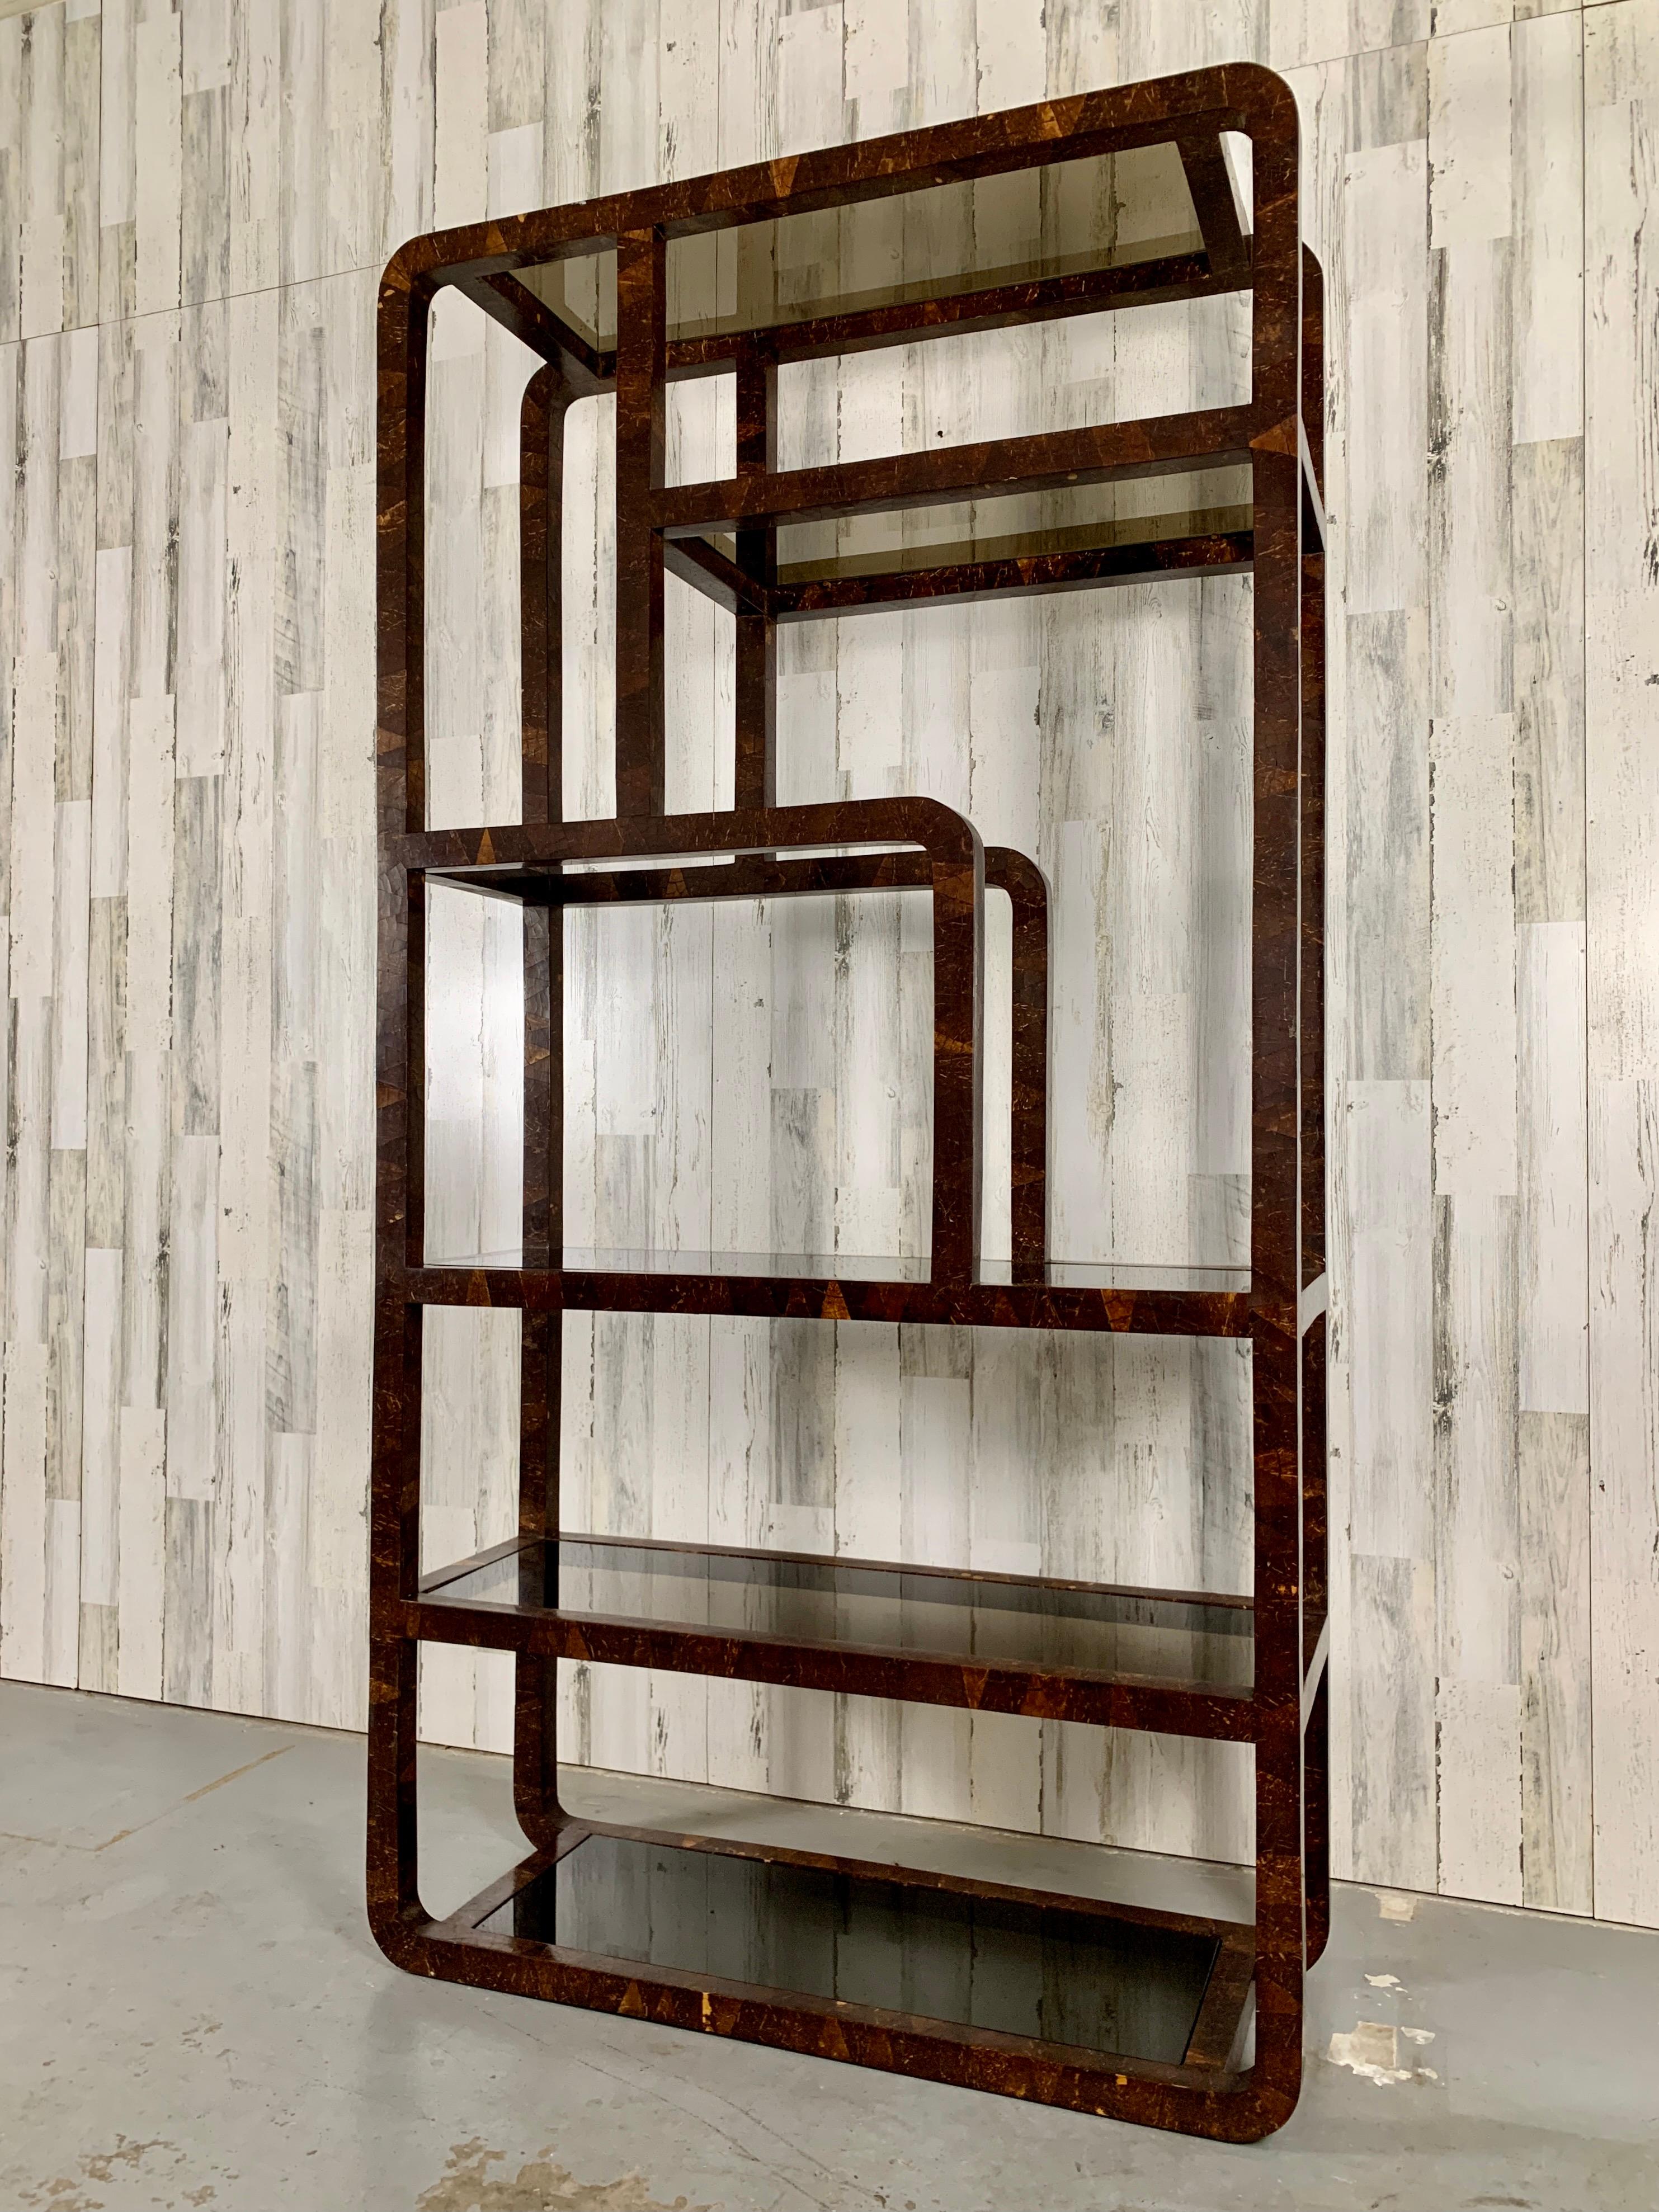 1980's modern freestanding unit wrapped in coconut shell veneer in a geometric pattern with smoked glass shelves.
Decorative on all sides so it can be used as a room divider.